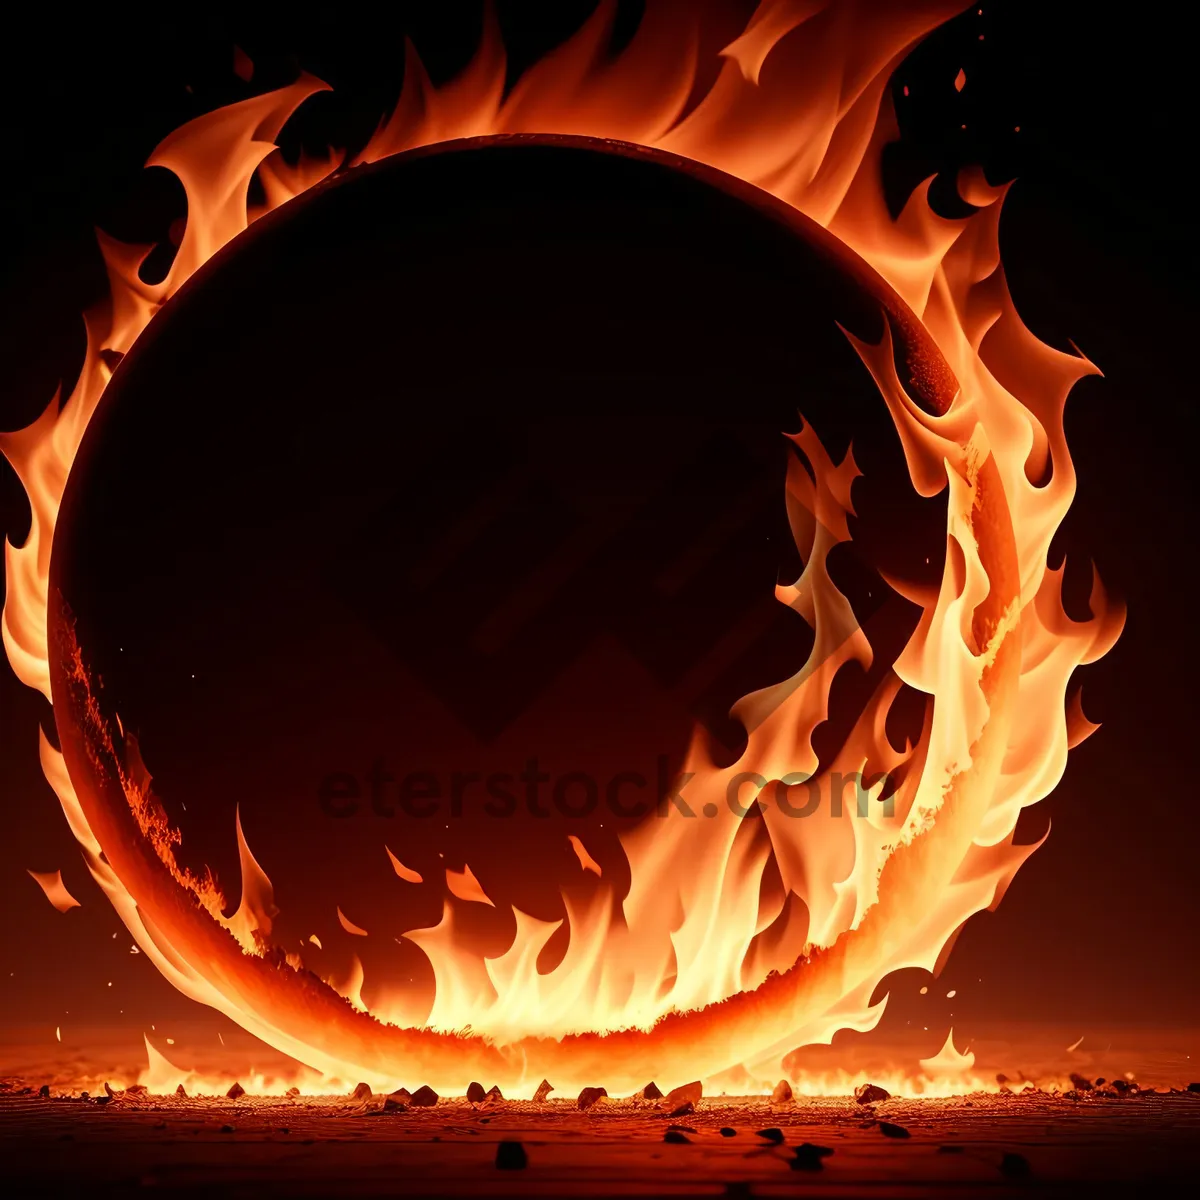 Picture of Fiery Glow: Captivating Heat, Blaze, and Design